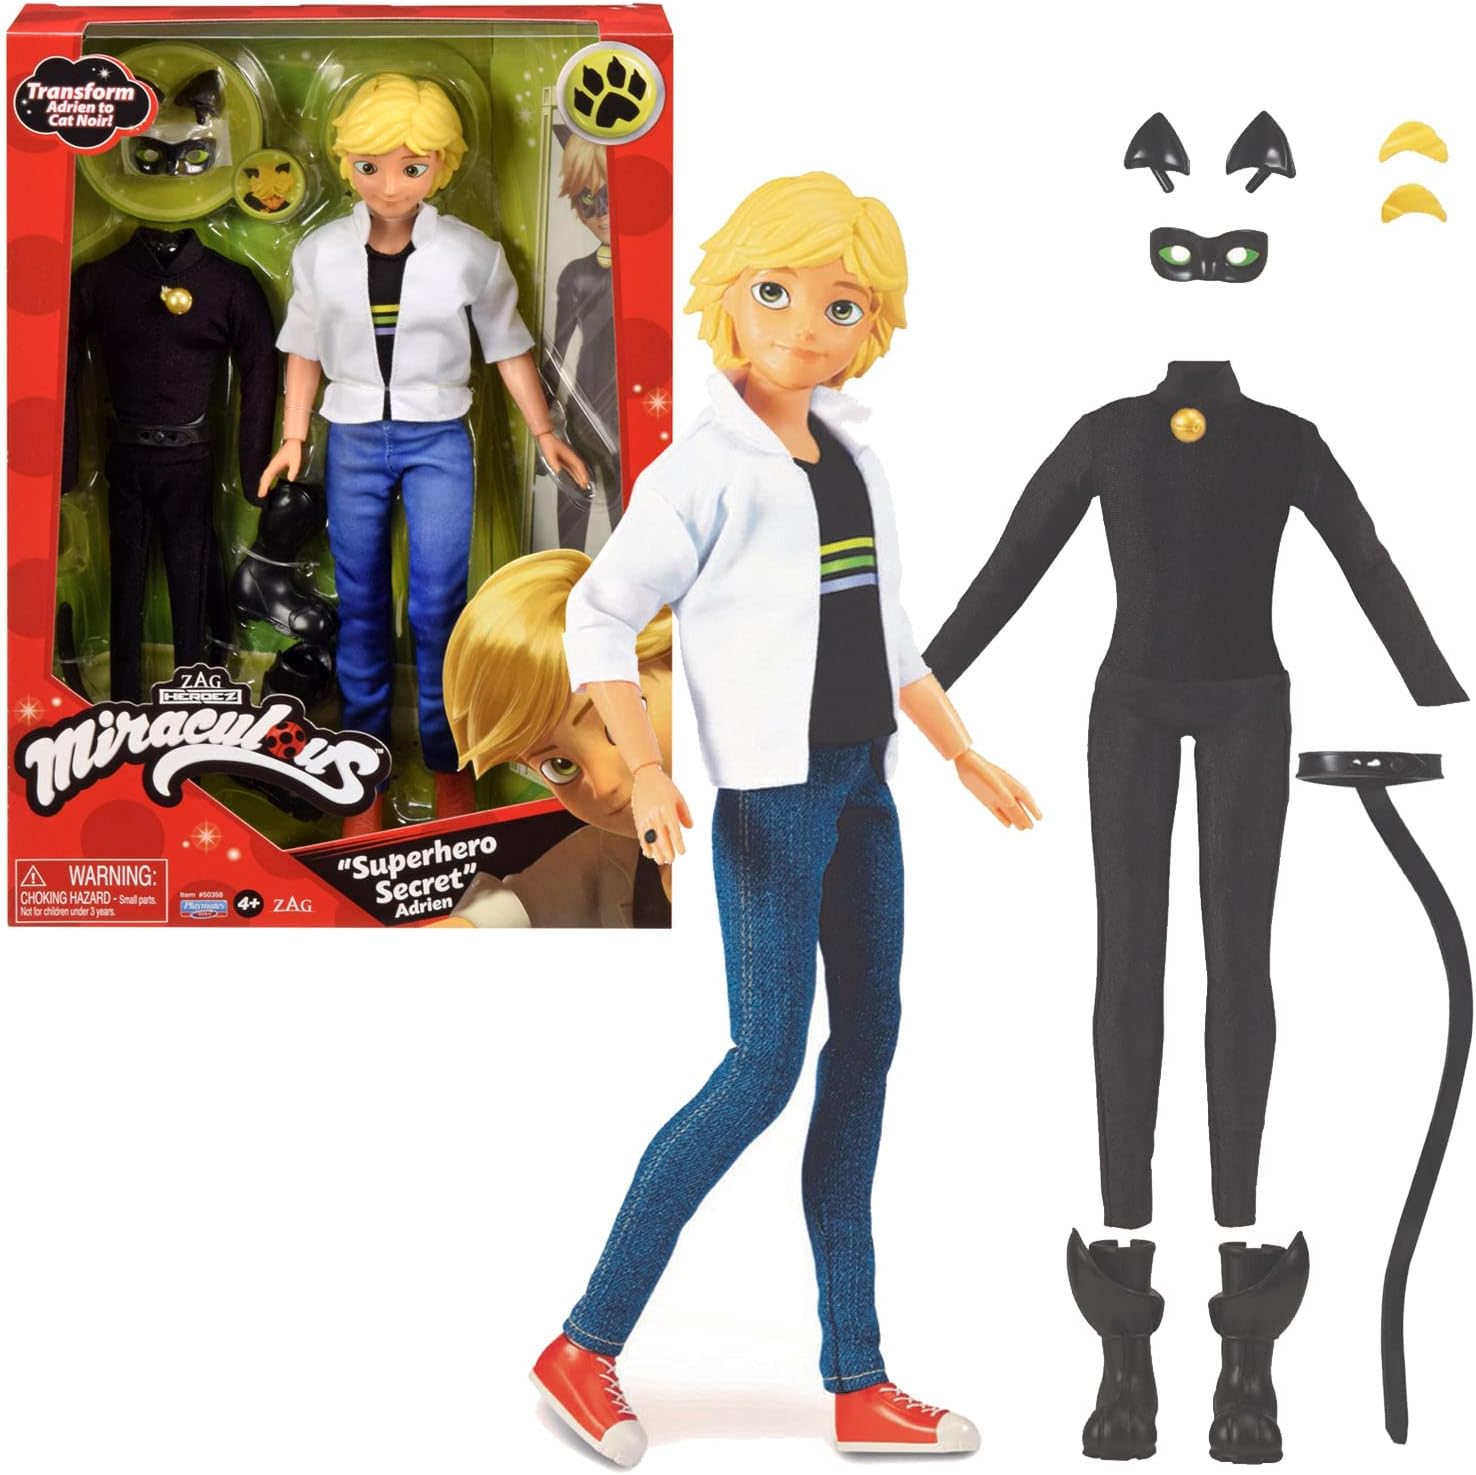 Real Authentic Brand New in Box U.S.A. Bandai Miraculous LADYBUG Fashion Doll 